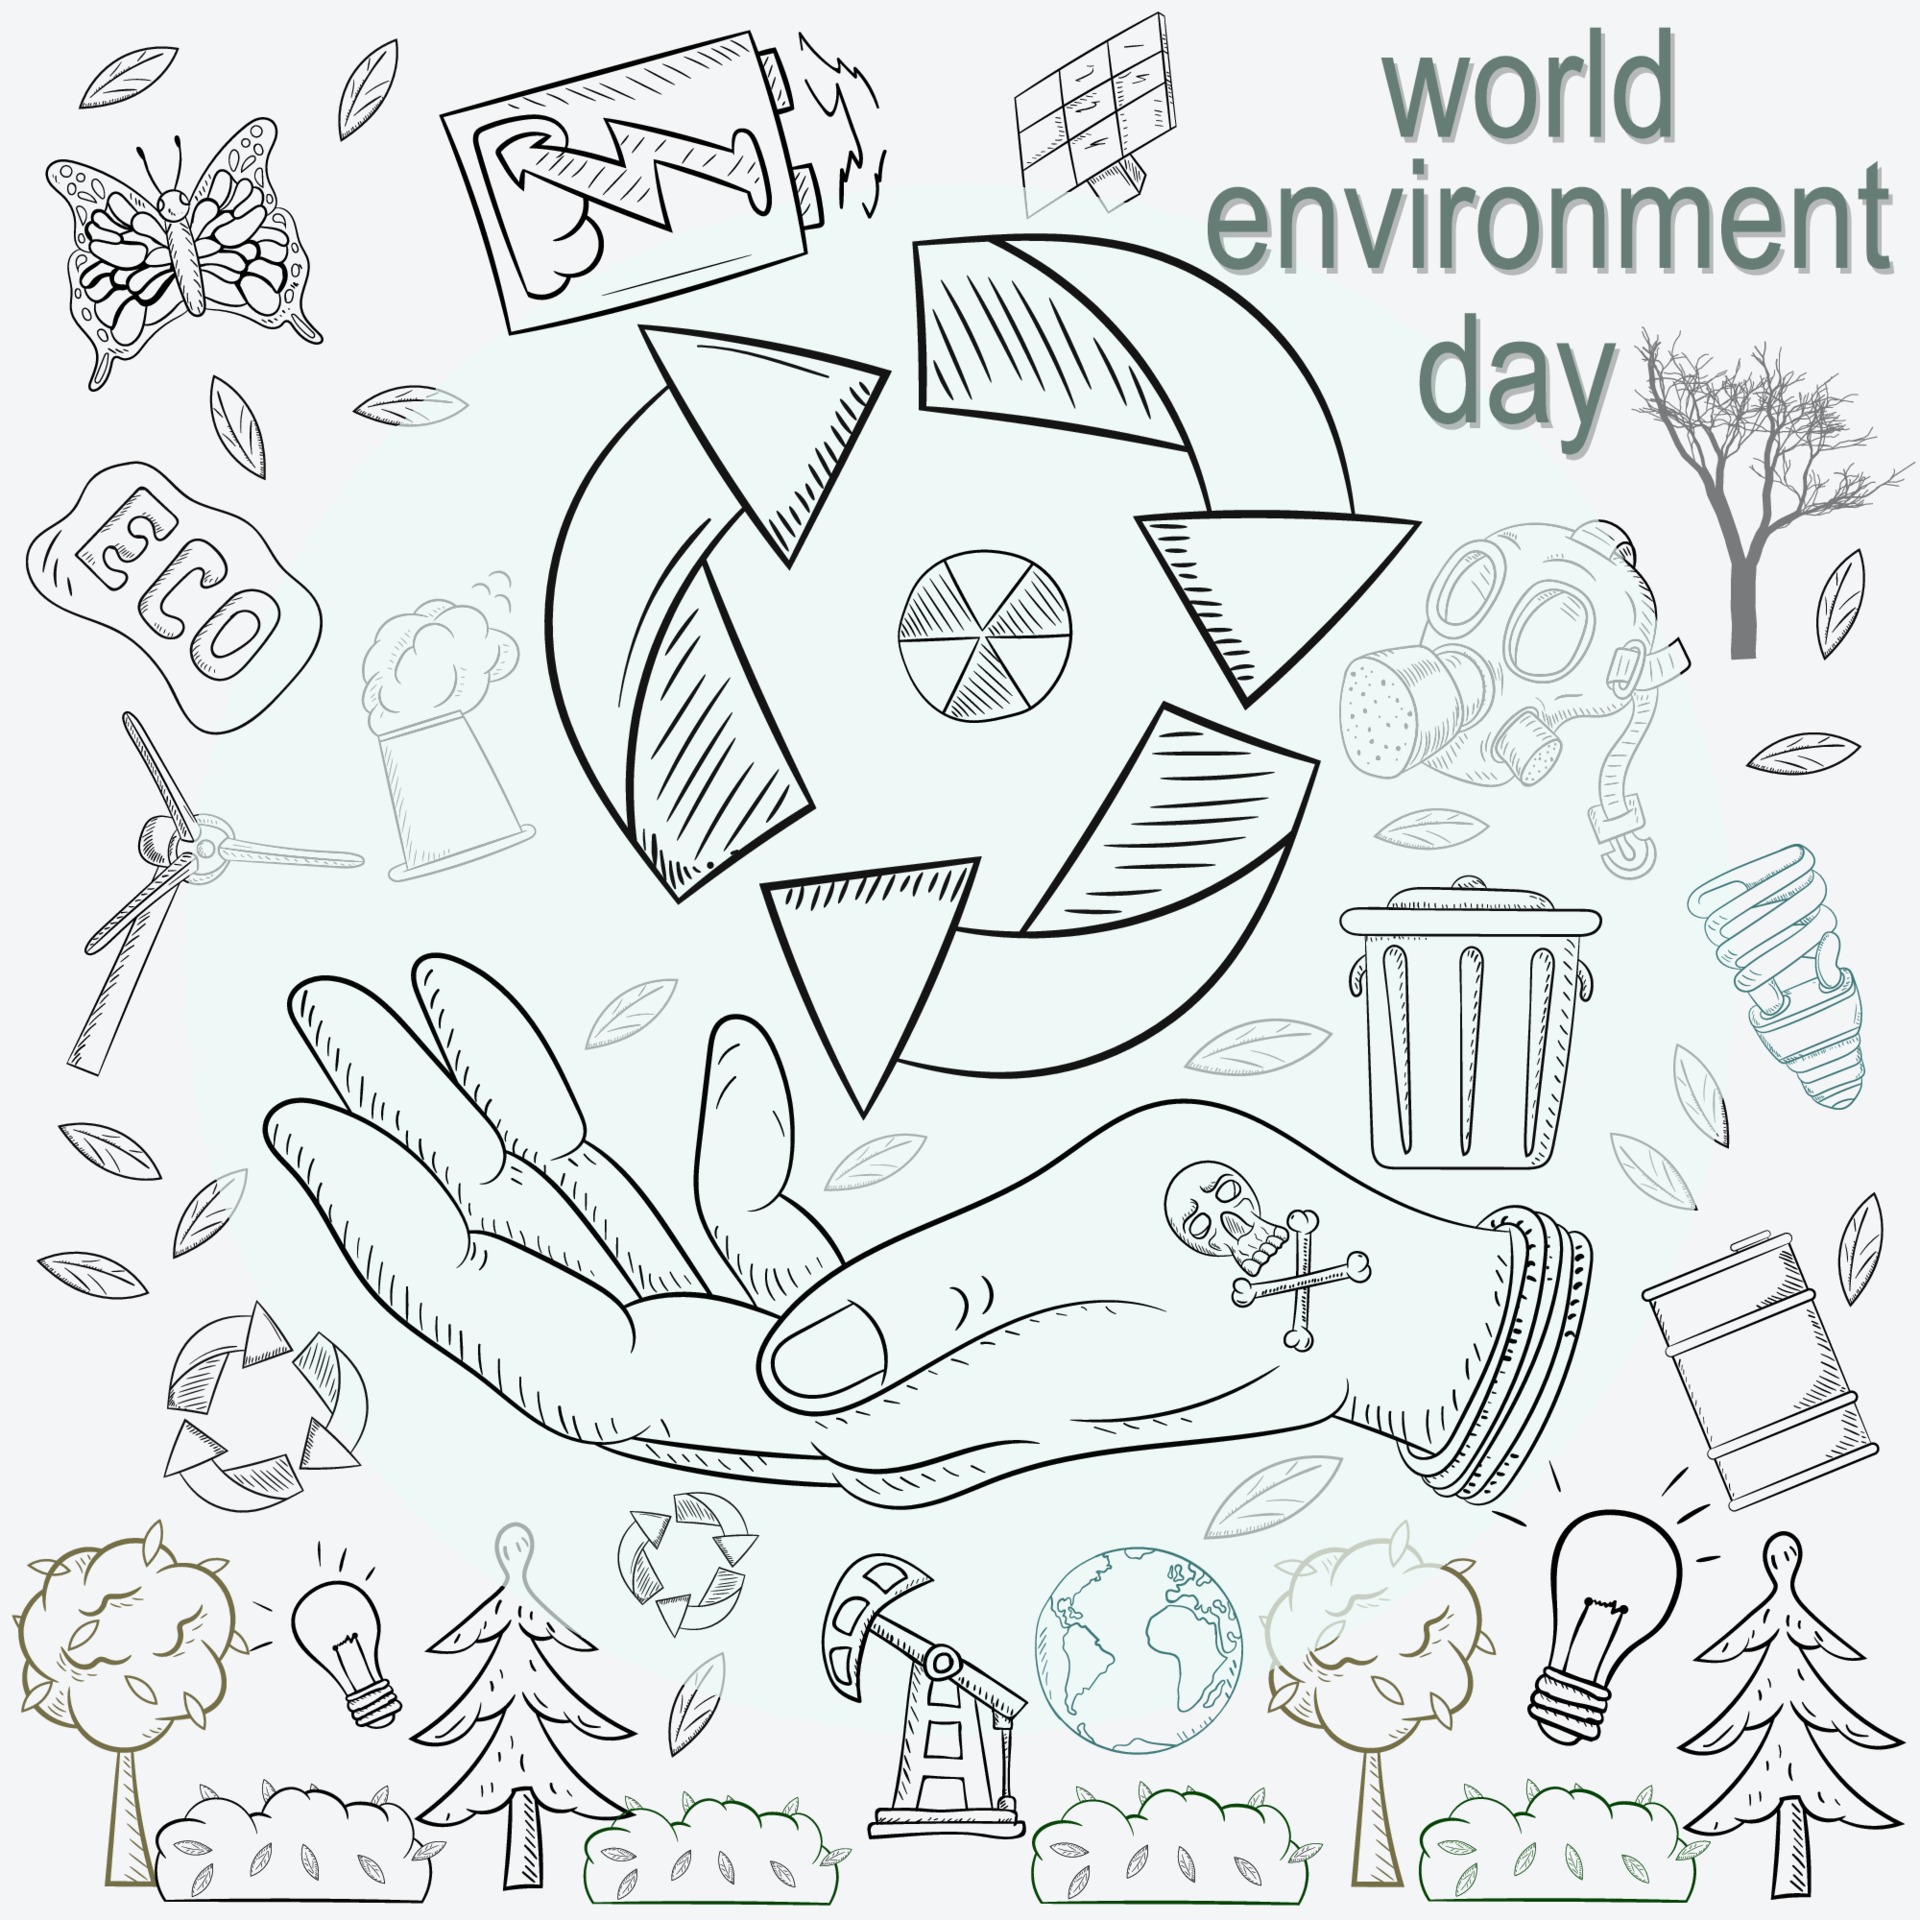 Share more than 167 best drawing on earth day latest - vietkidsiq.edu.vn